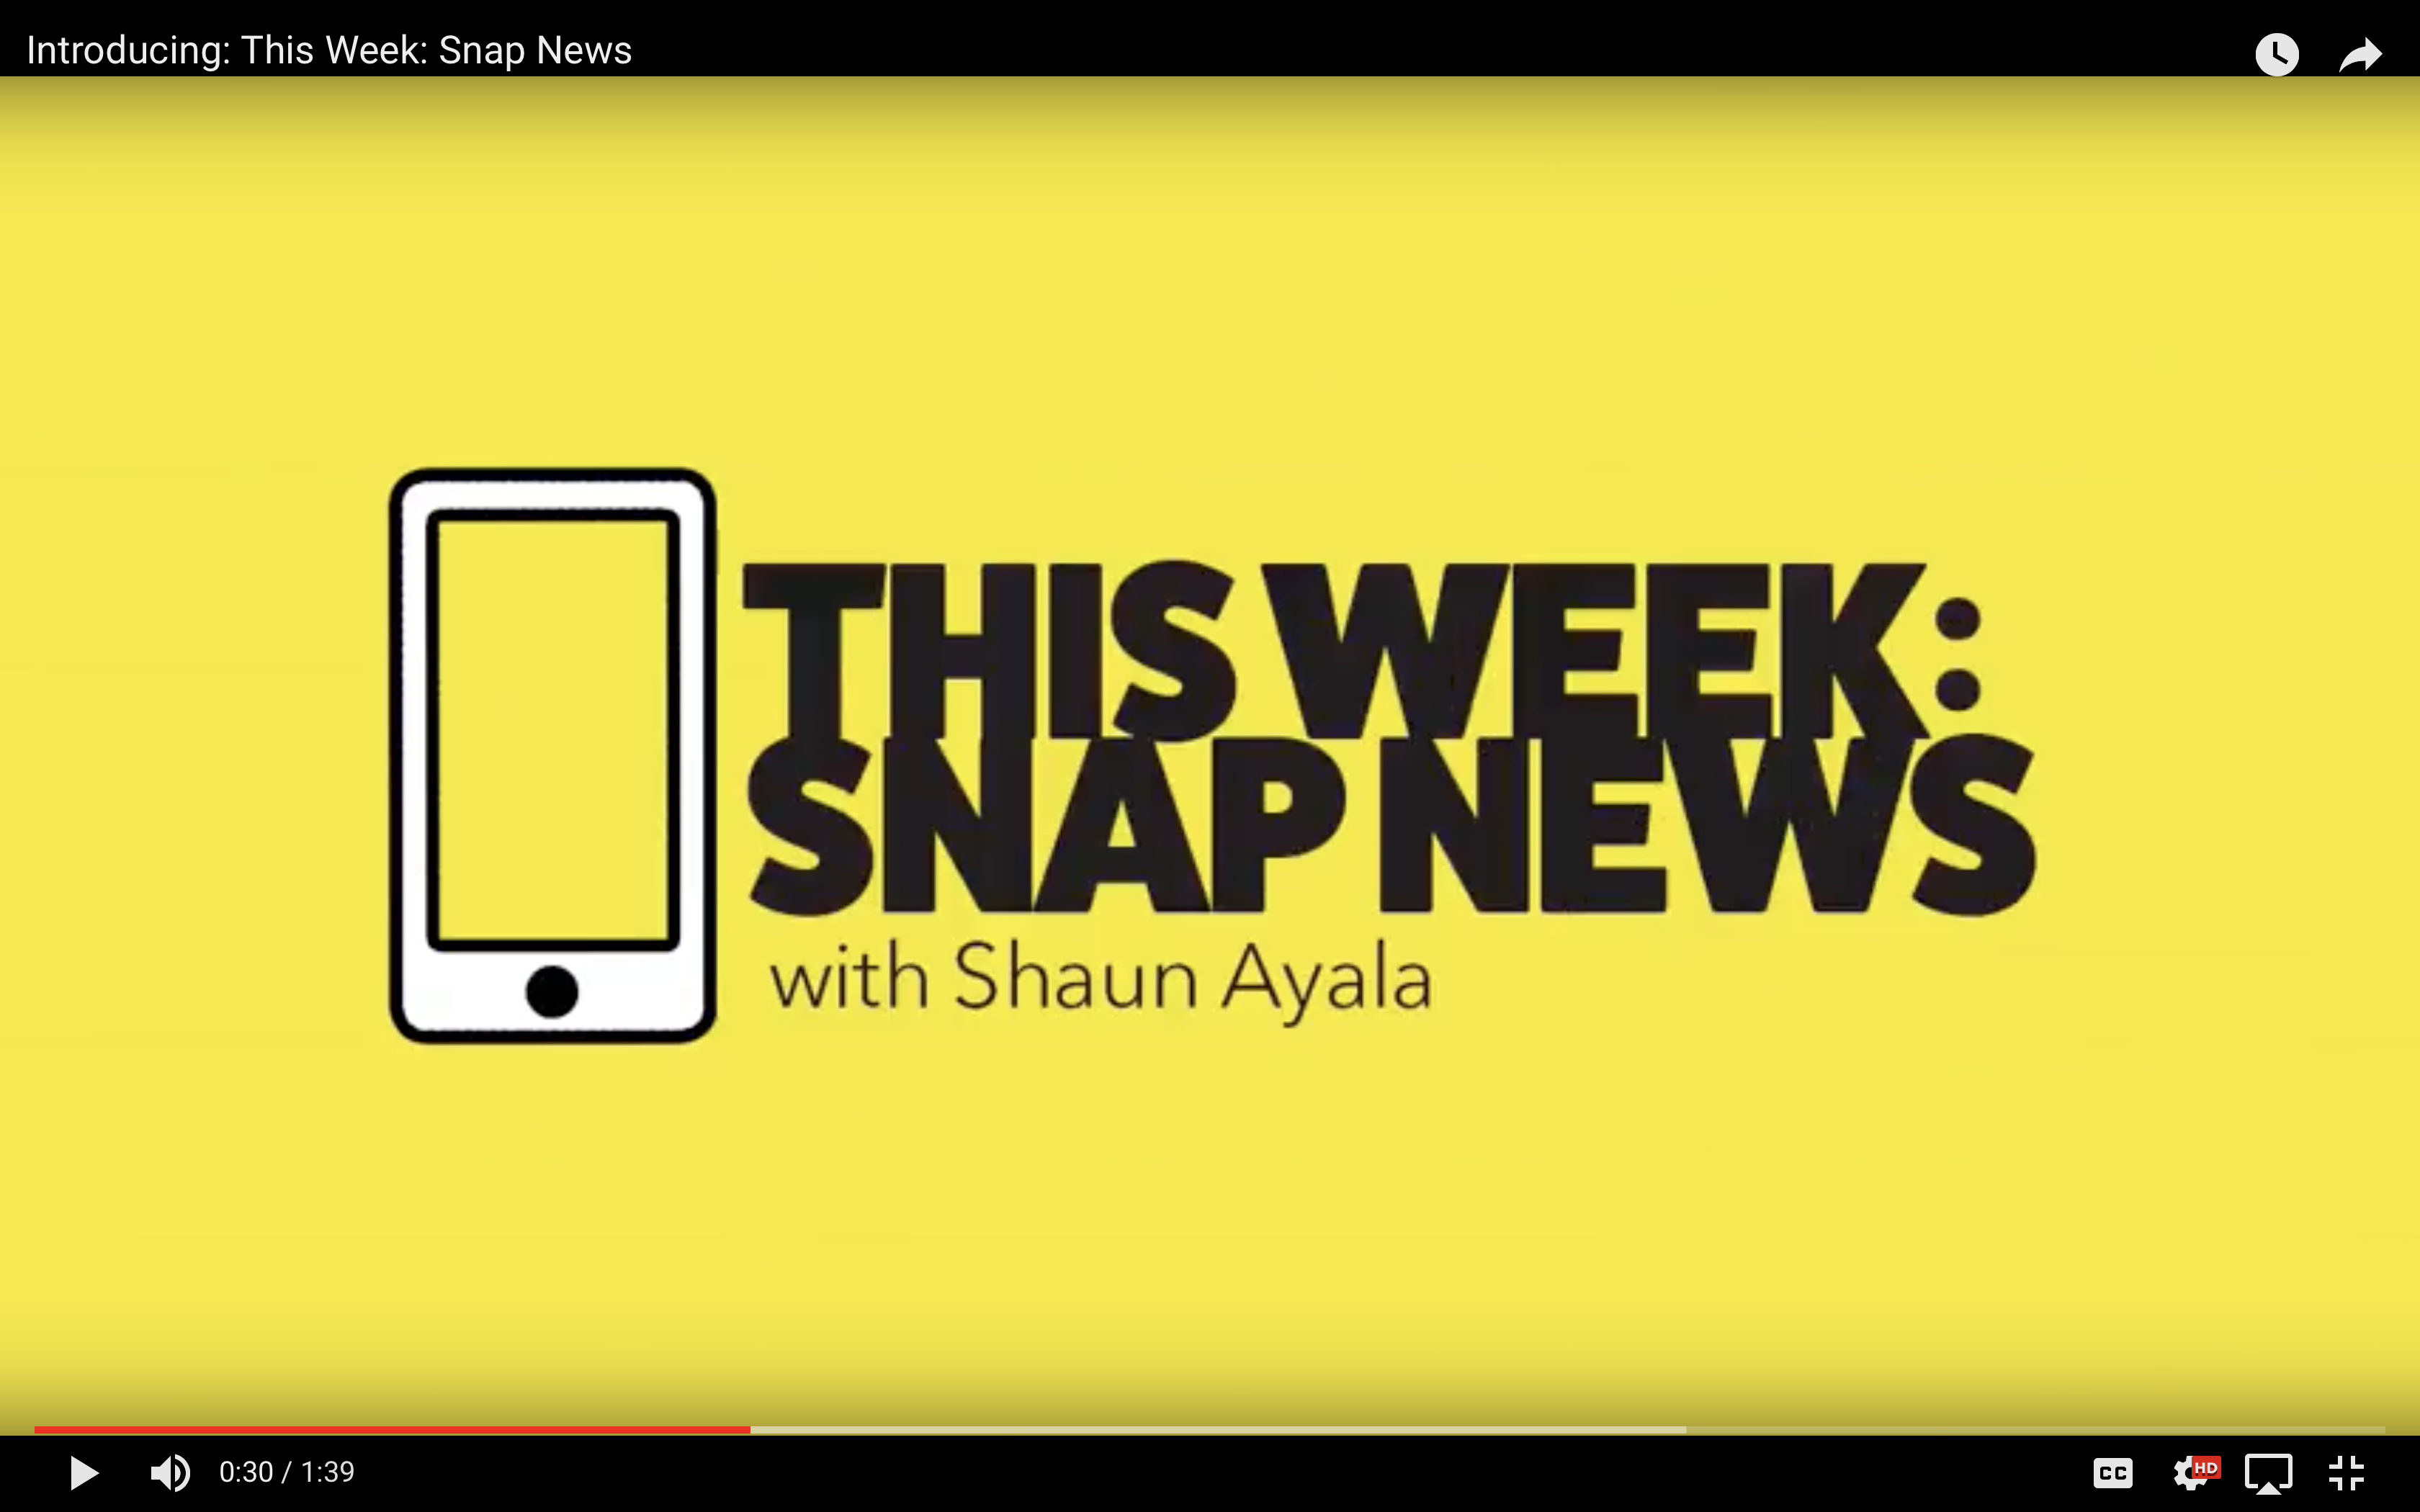 This Week: #SnapNews — Episode #25 (News Featuring F1, Crocs, Jumanji and more)